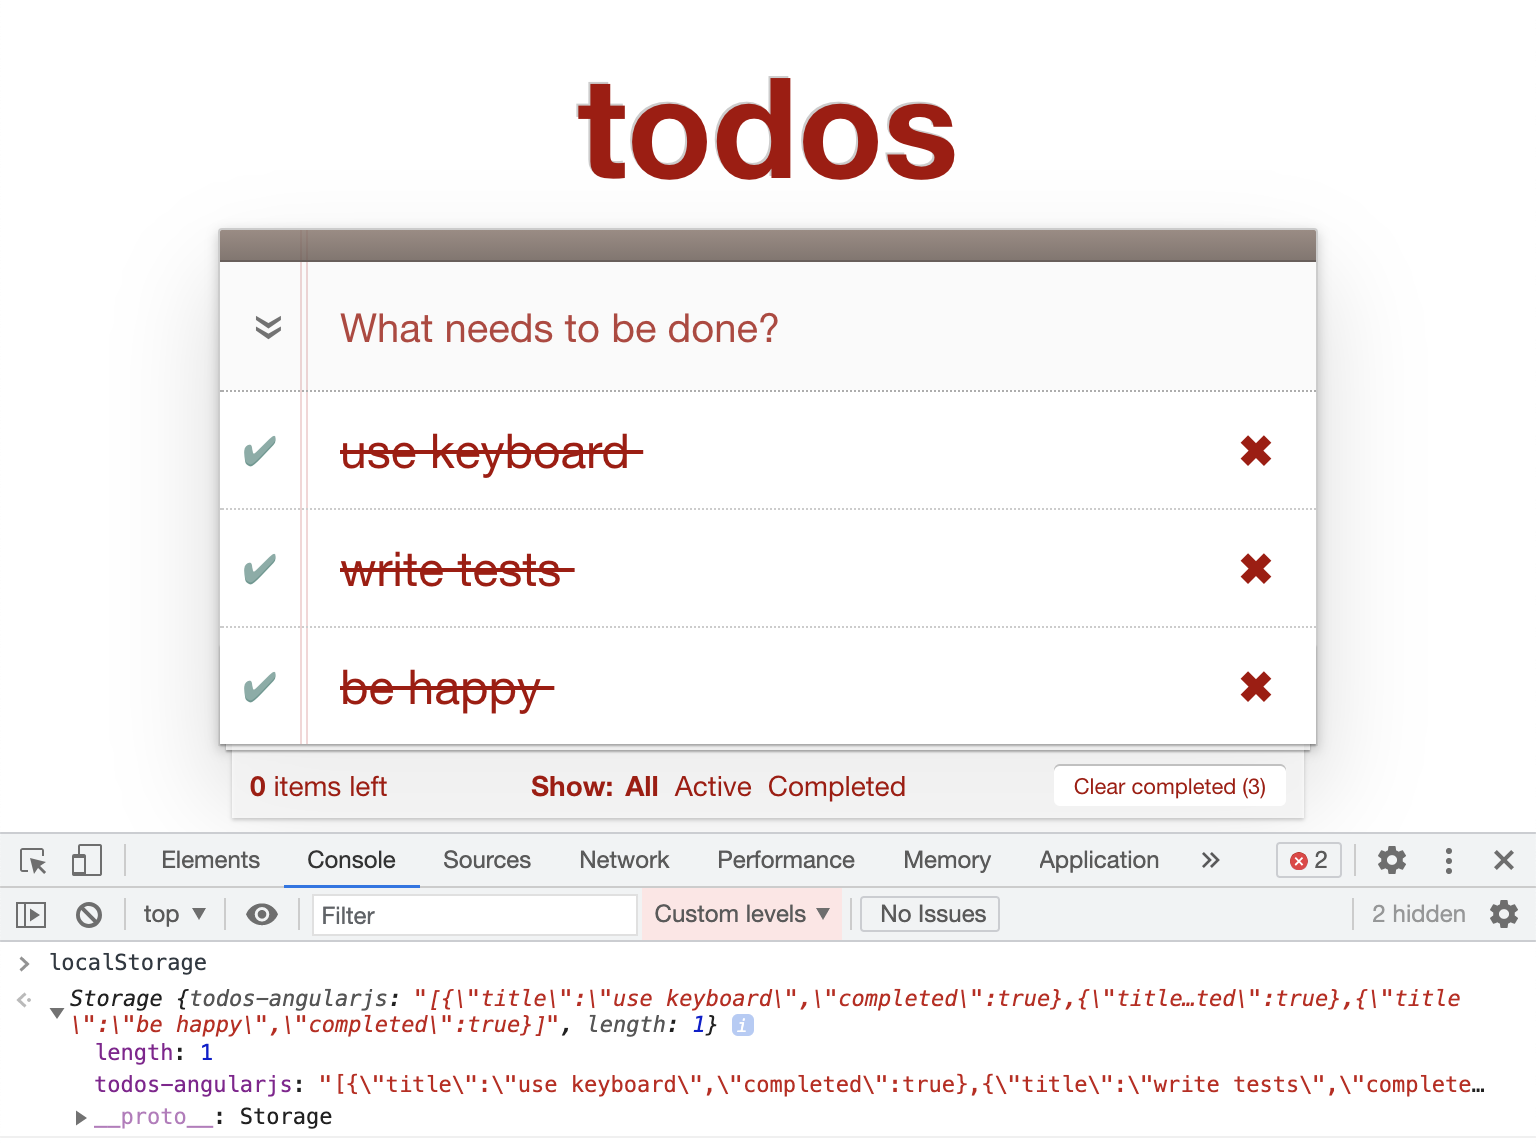 Todo items stored by the application